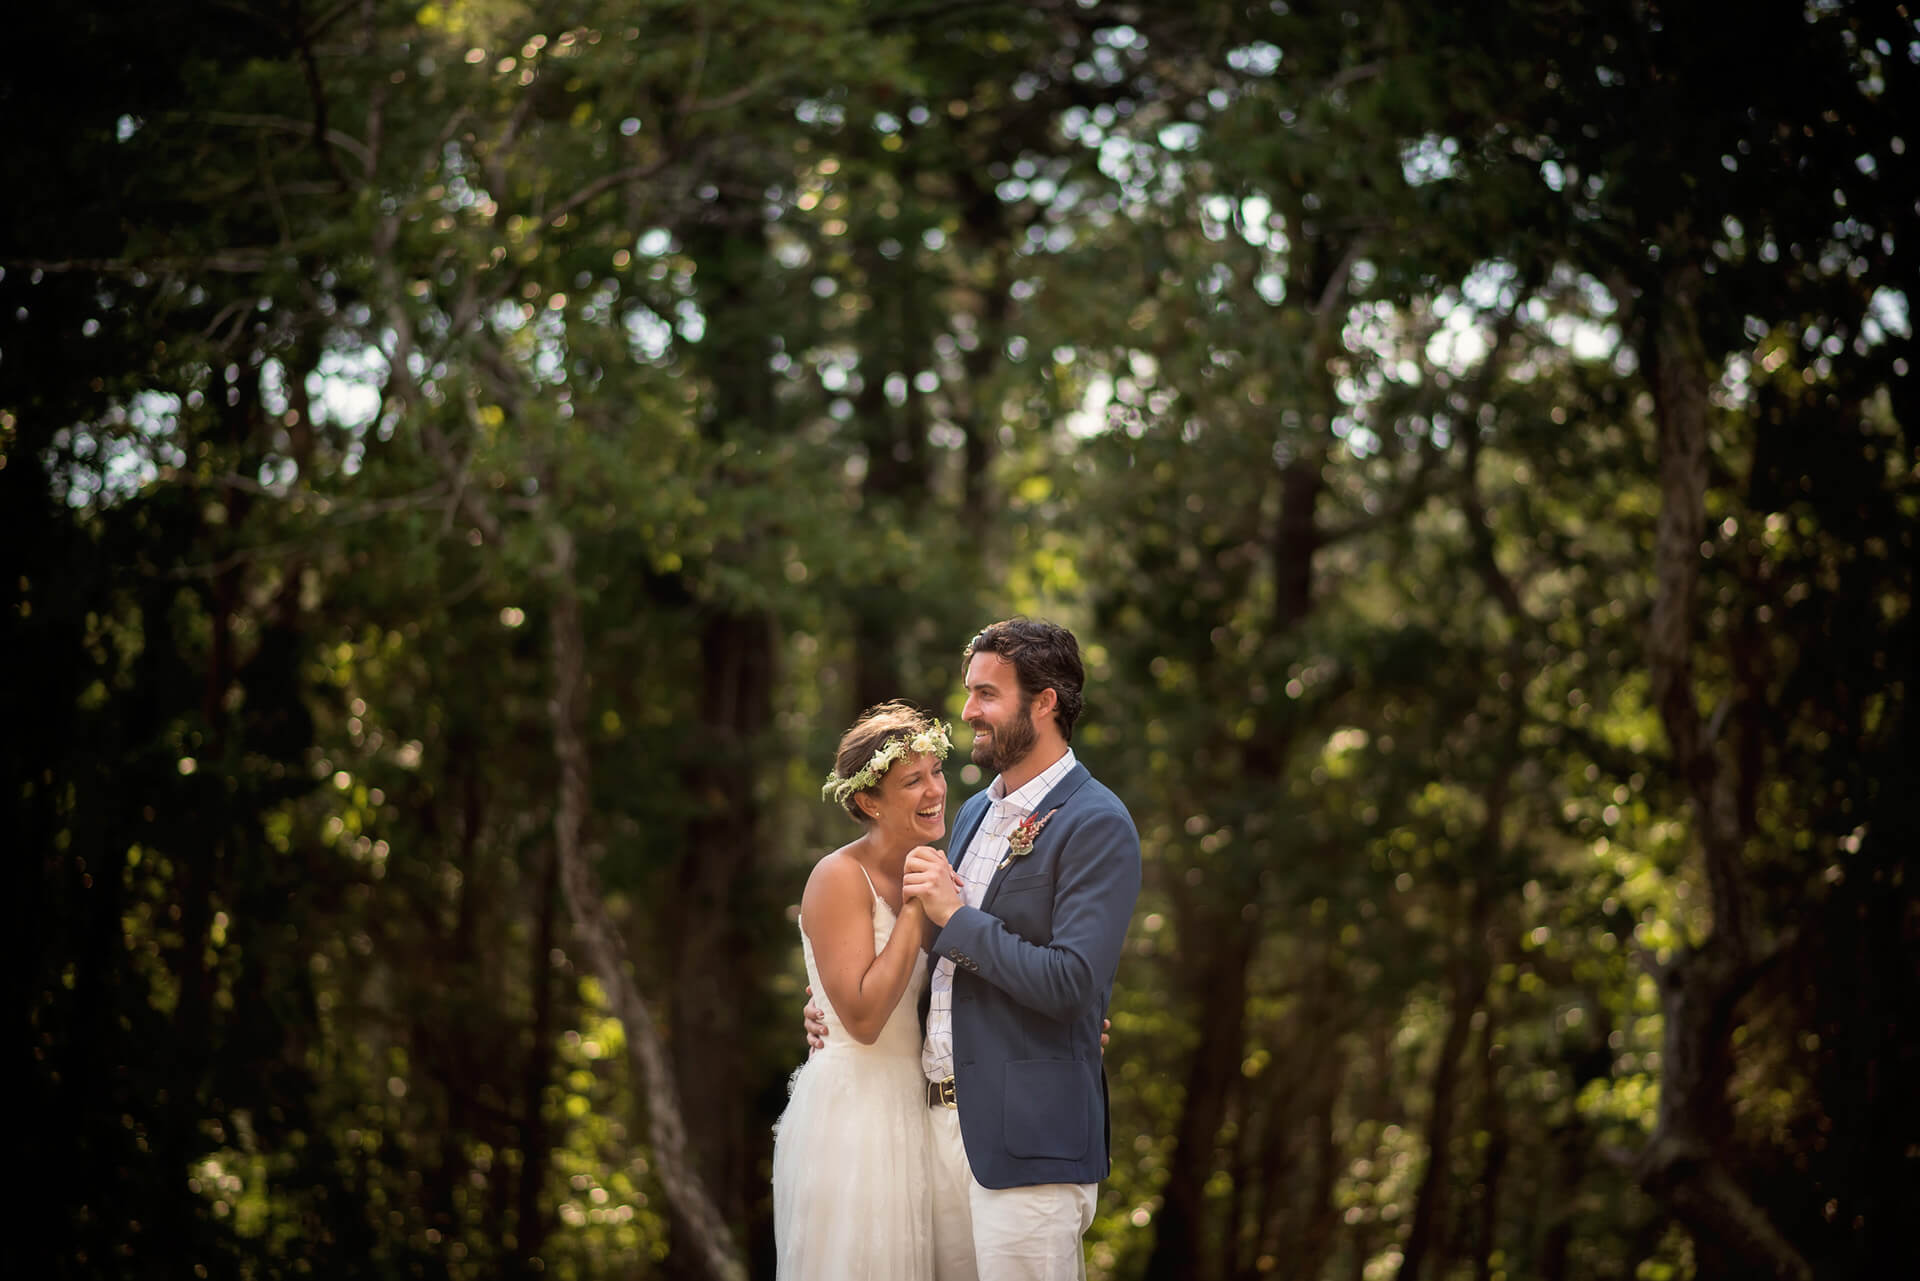 Private Residence on the Cape Wedding: Jessie & Tim